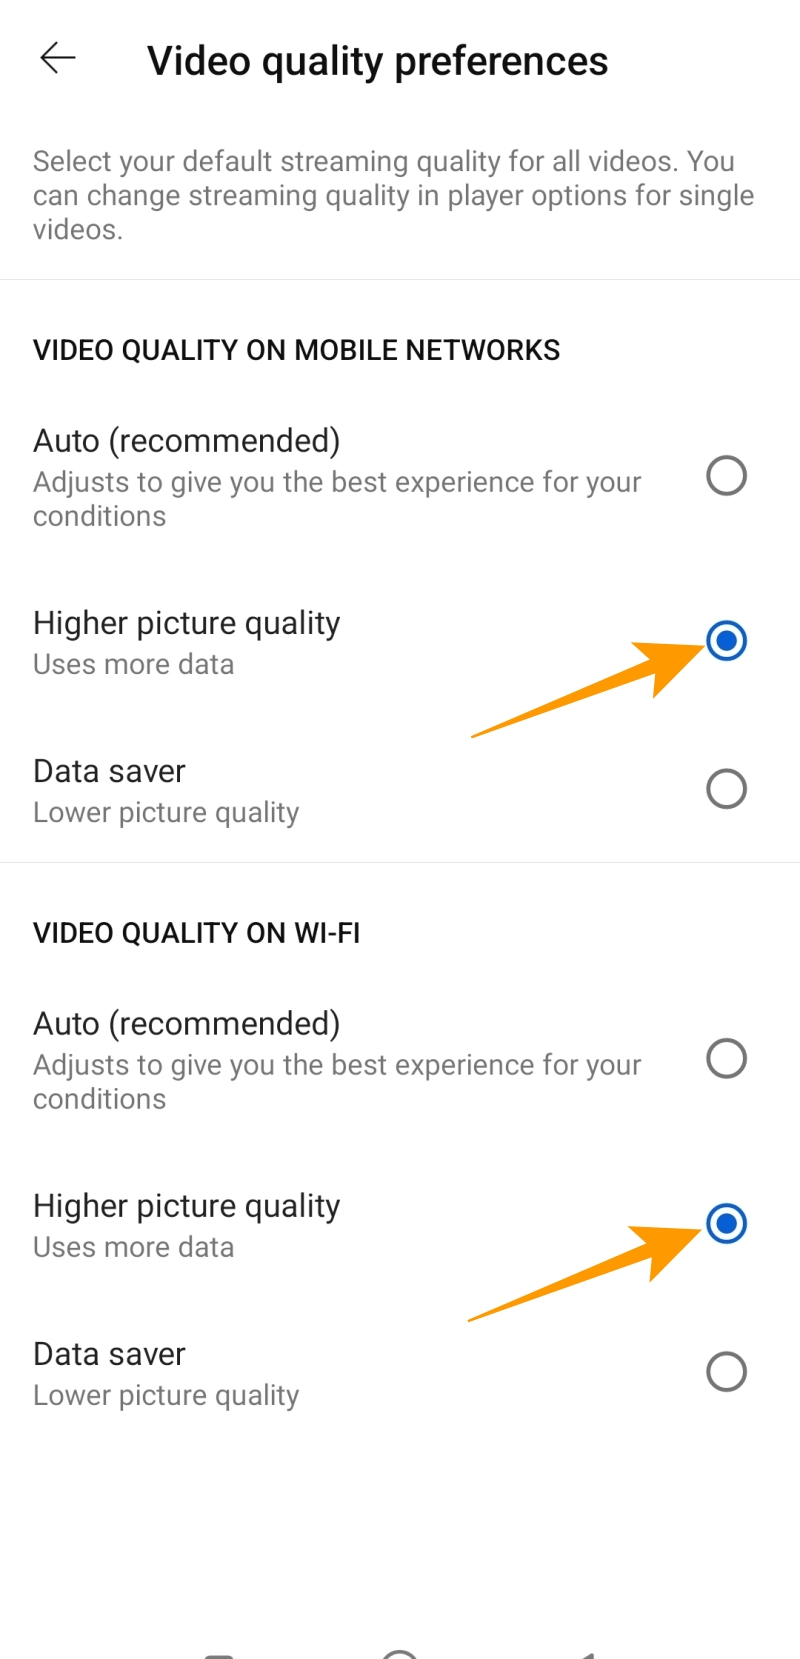 Video quality preference options